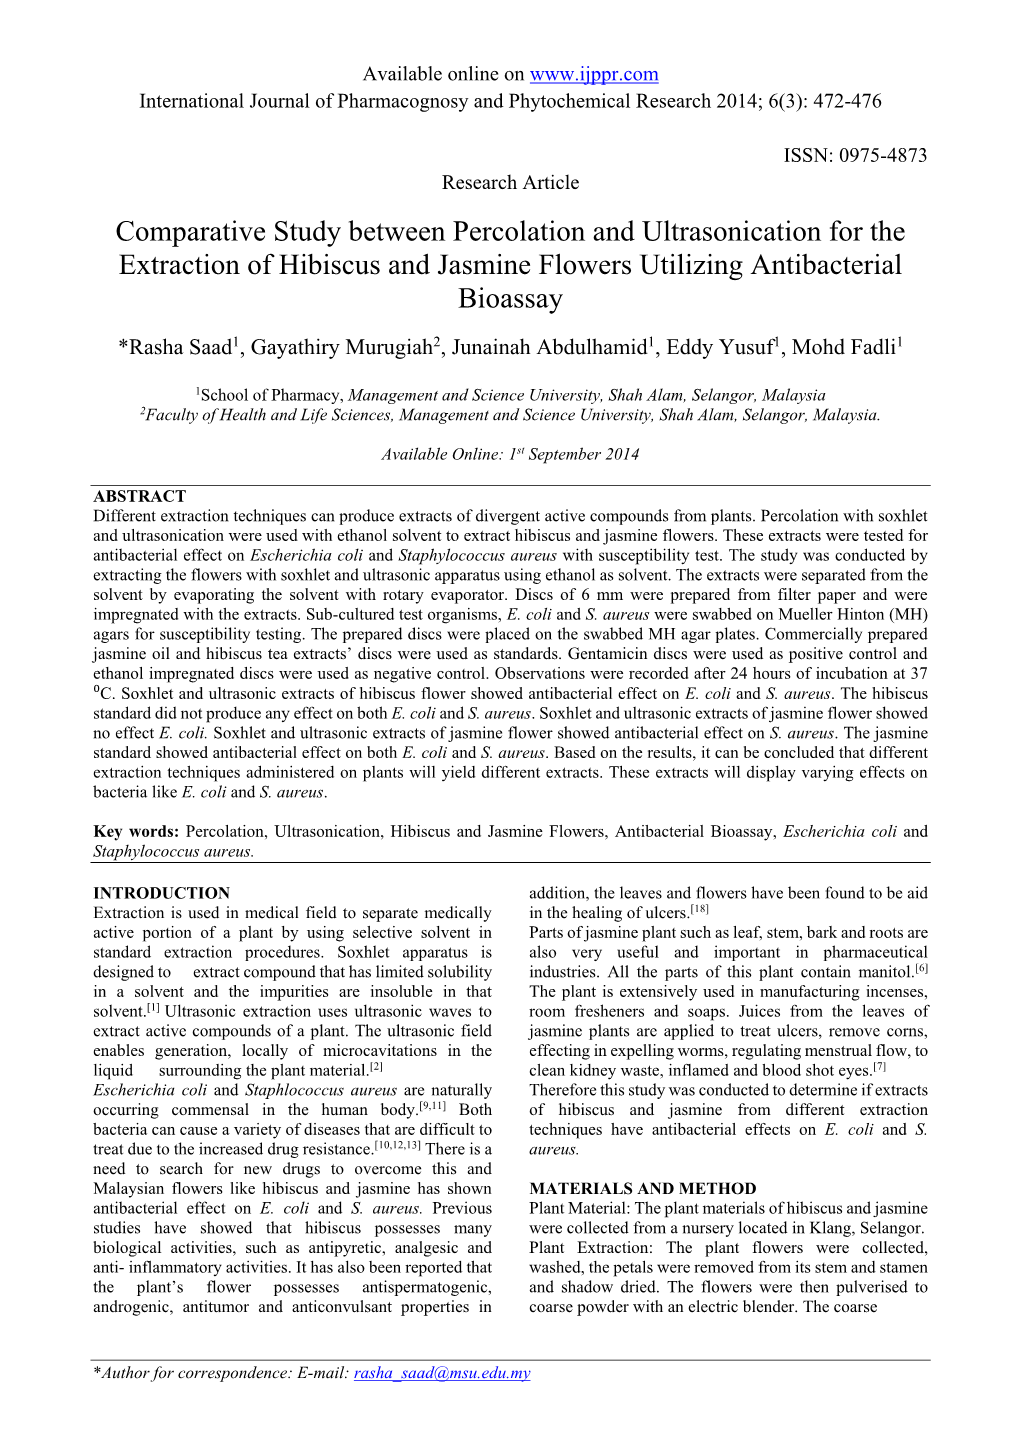 Comparative Study Between Percolation and Ultrasonication for the Extraction of Hibiscus and Jasmine Flowers Utilizing Antibacterial Bioassay